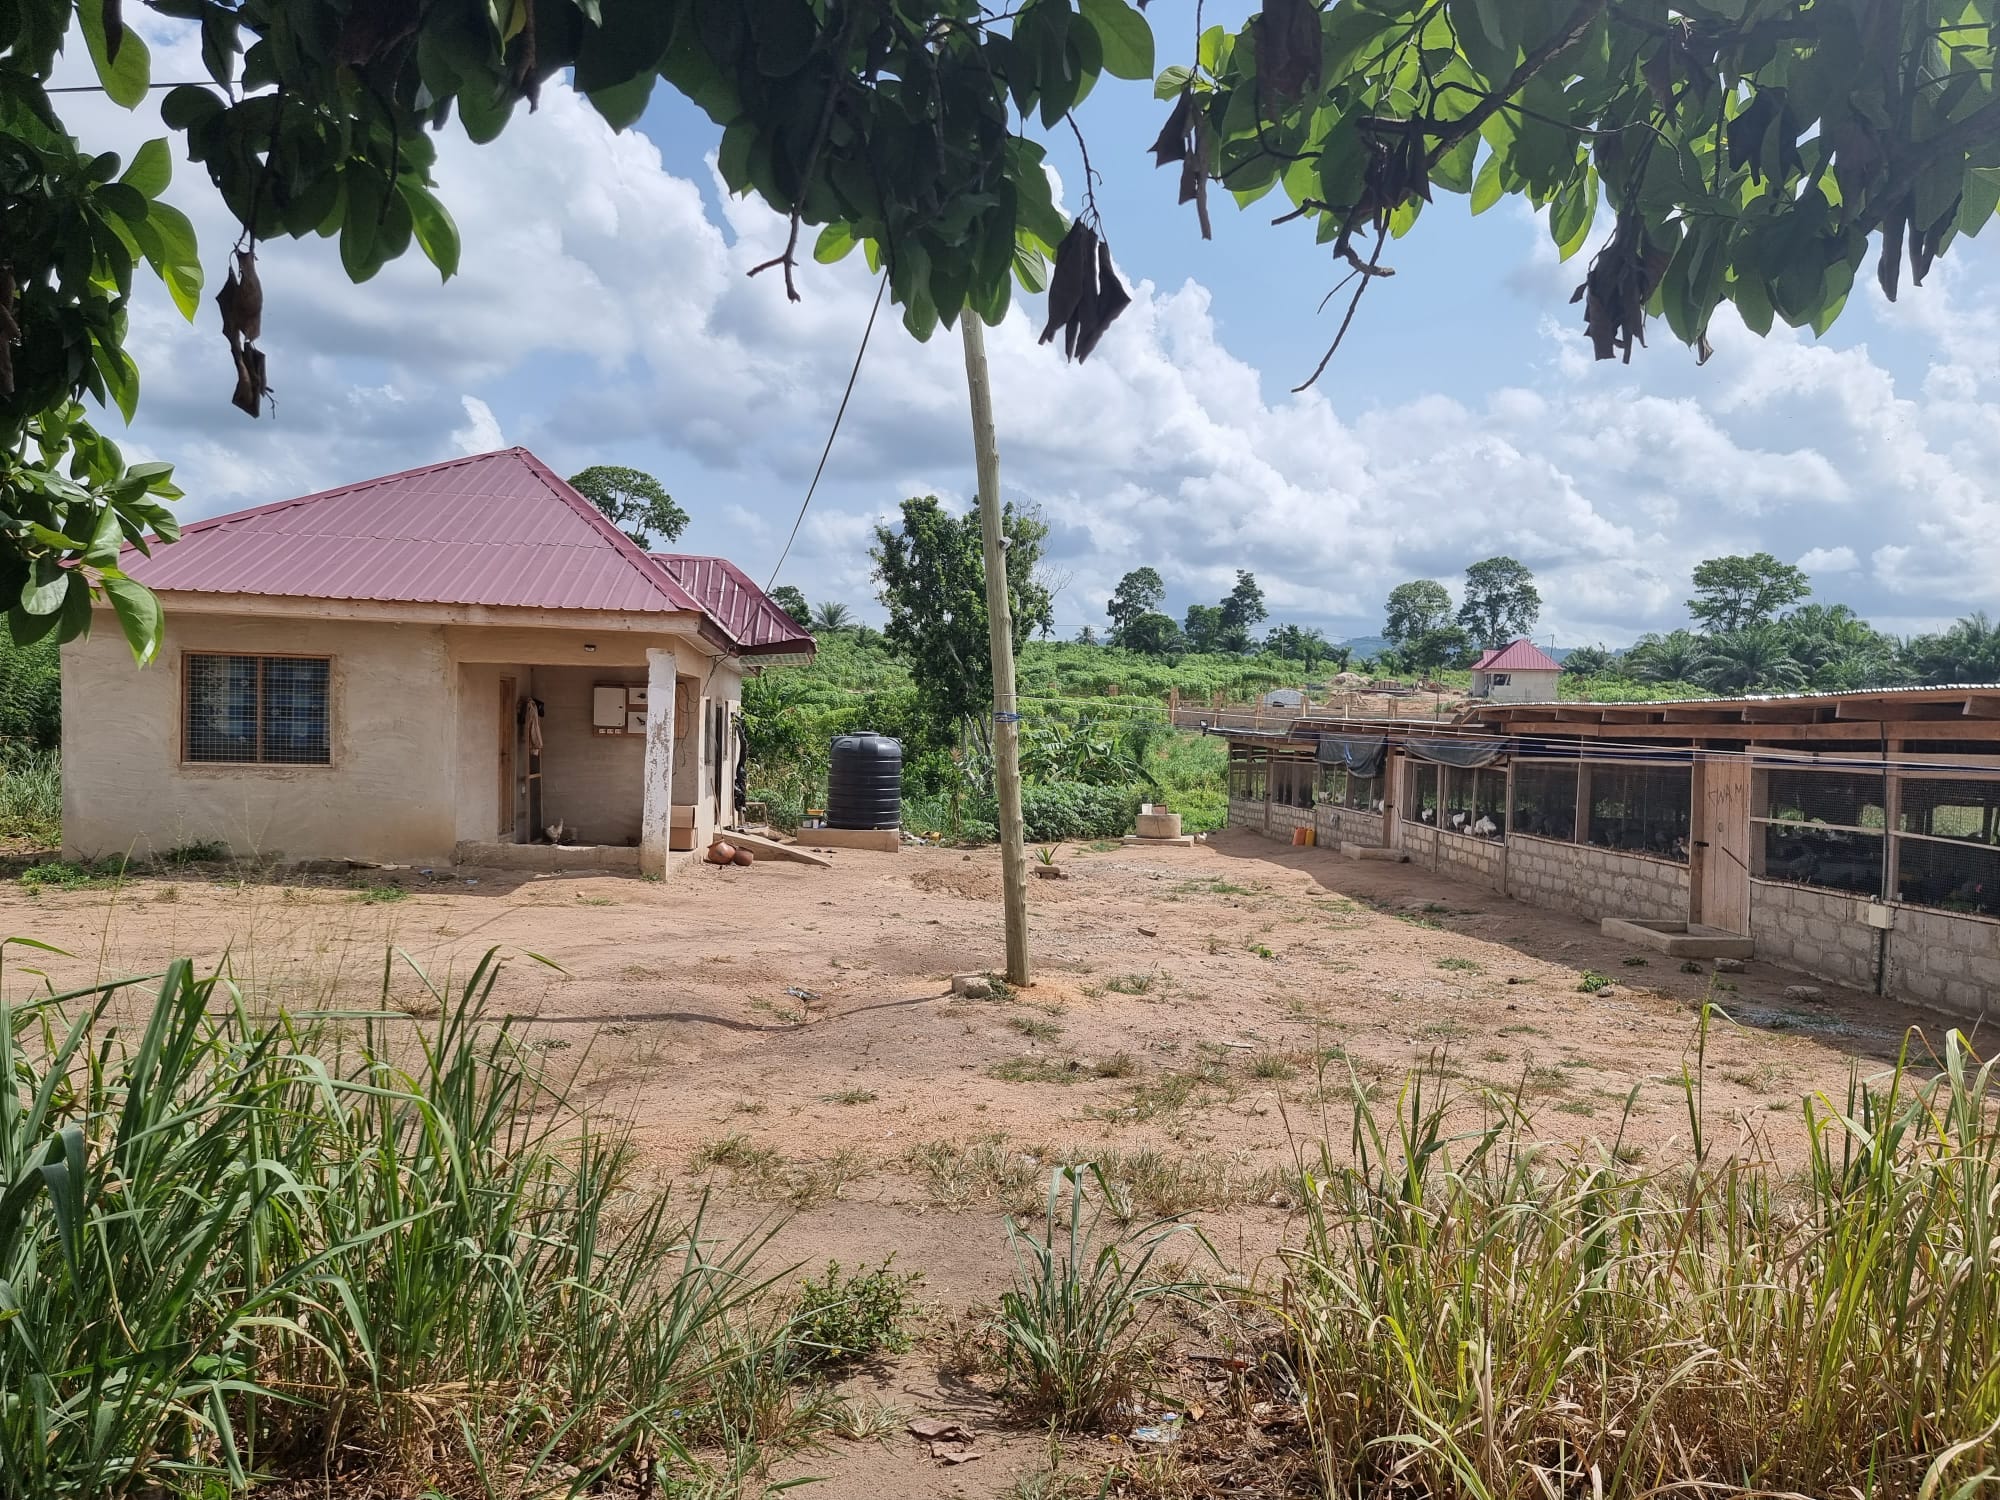 Poultry Farm with birds for sale